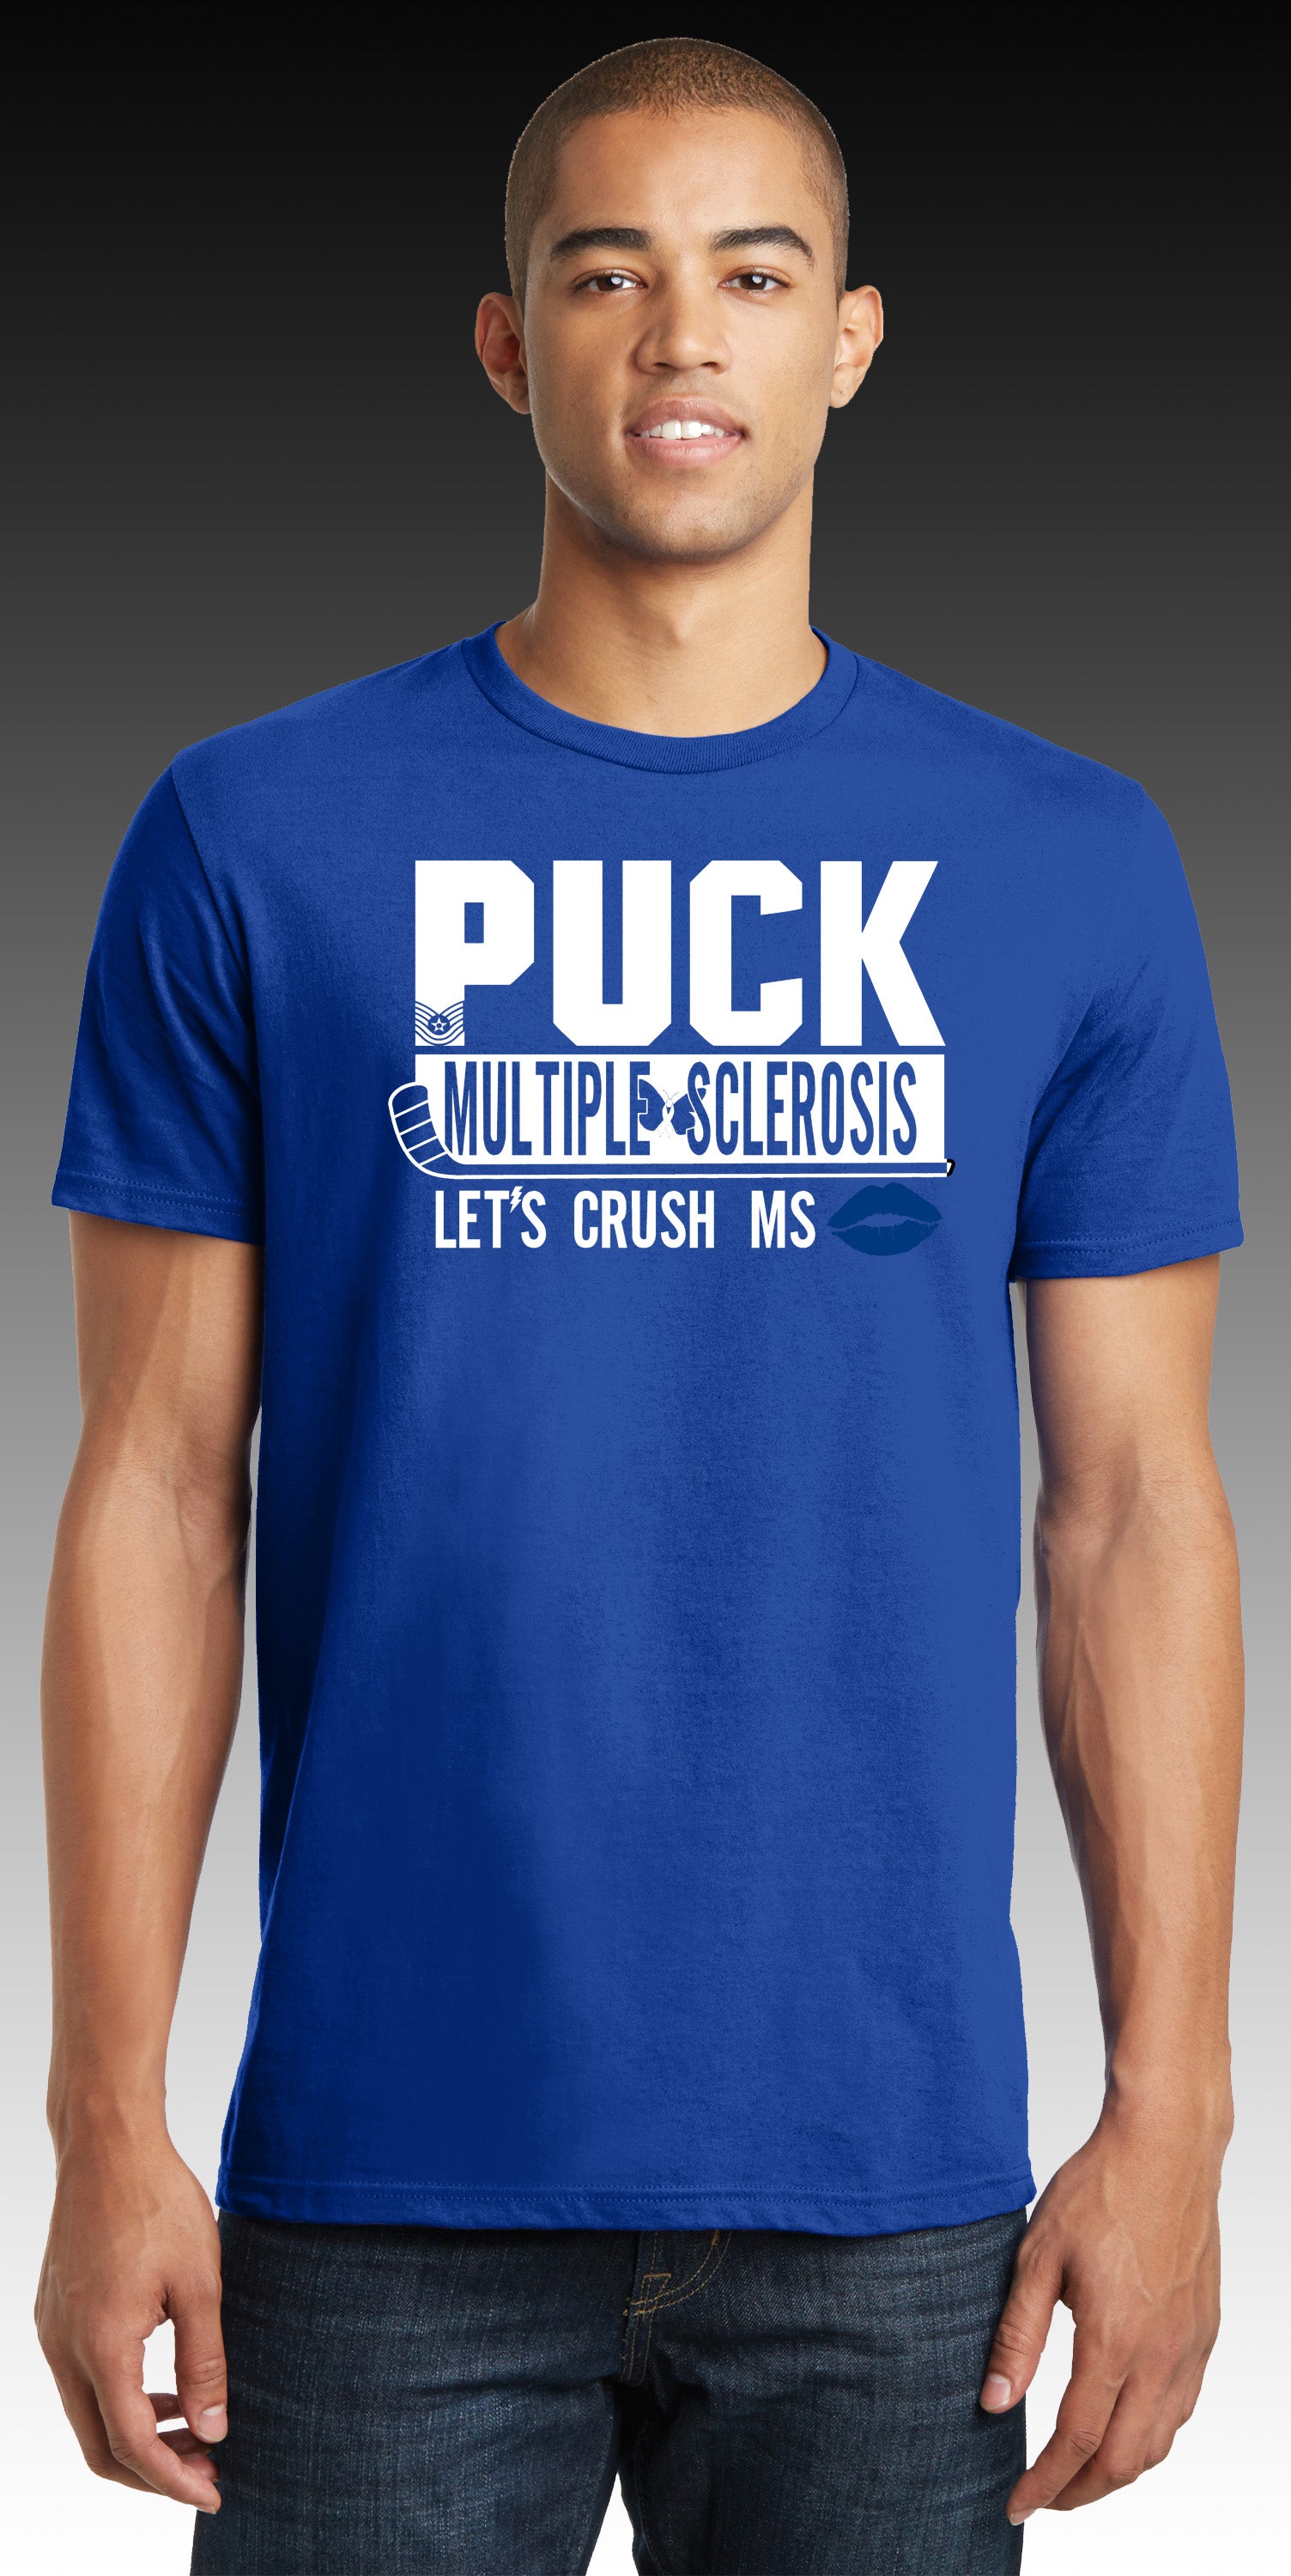 Puck Multiple Sclerosis